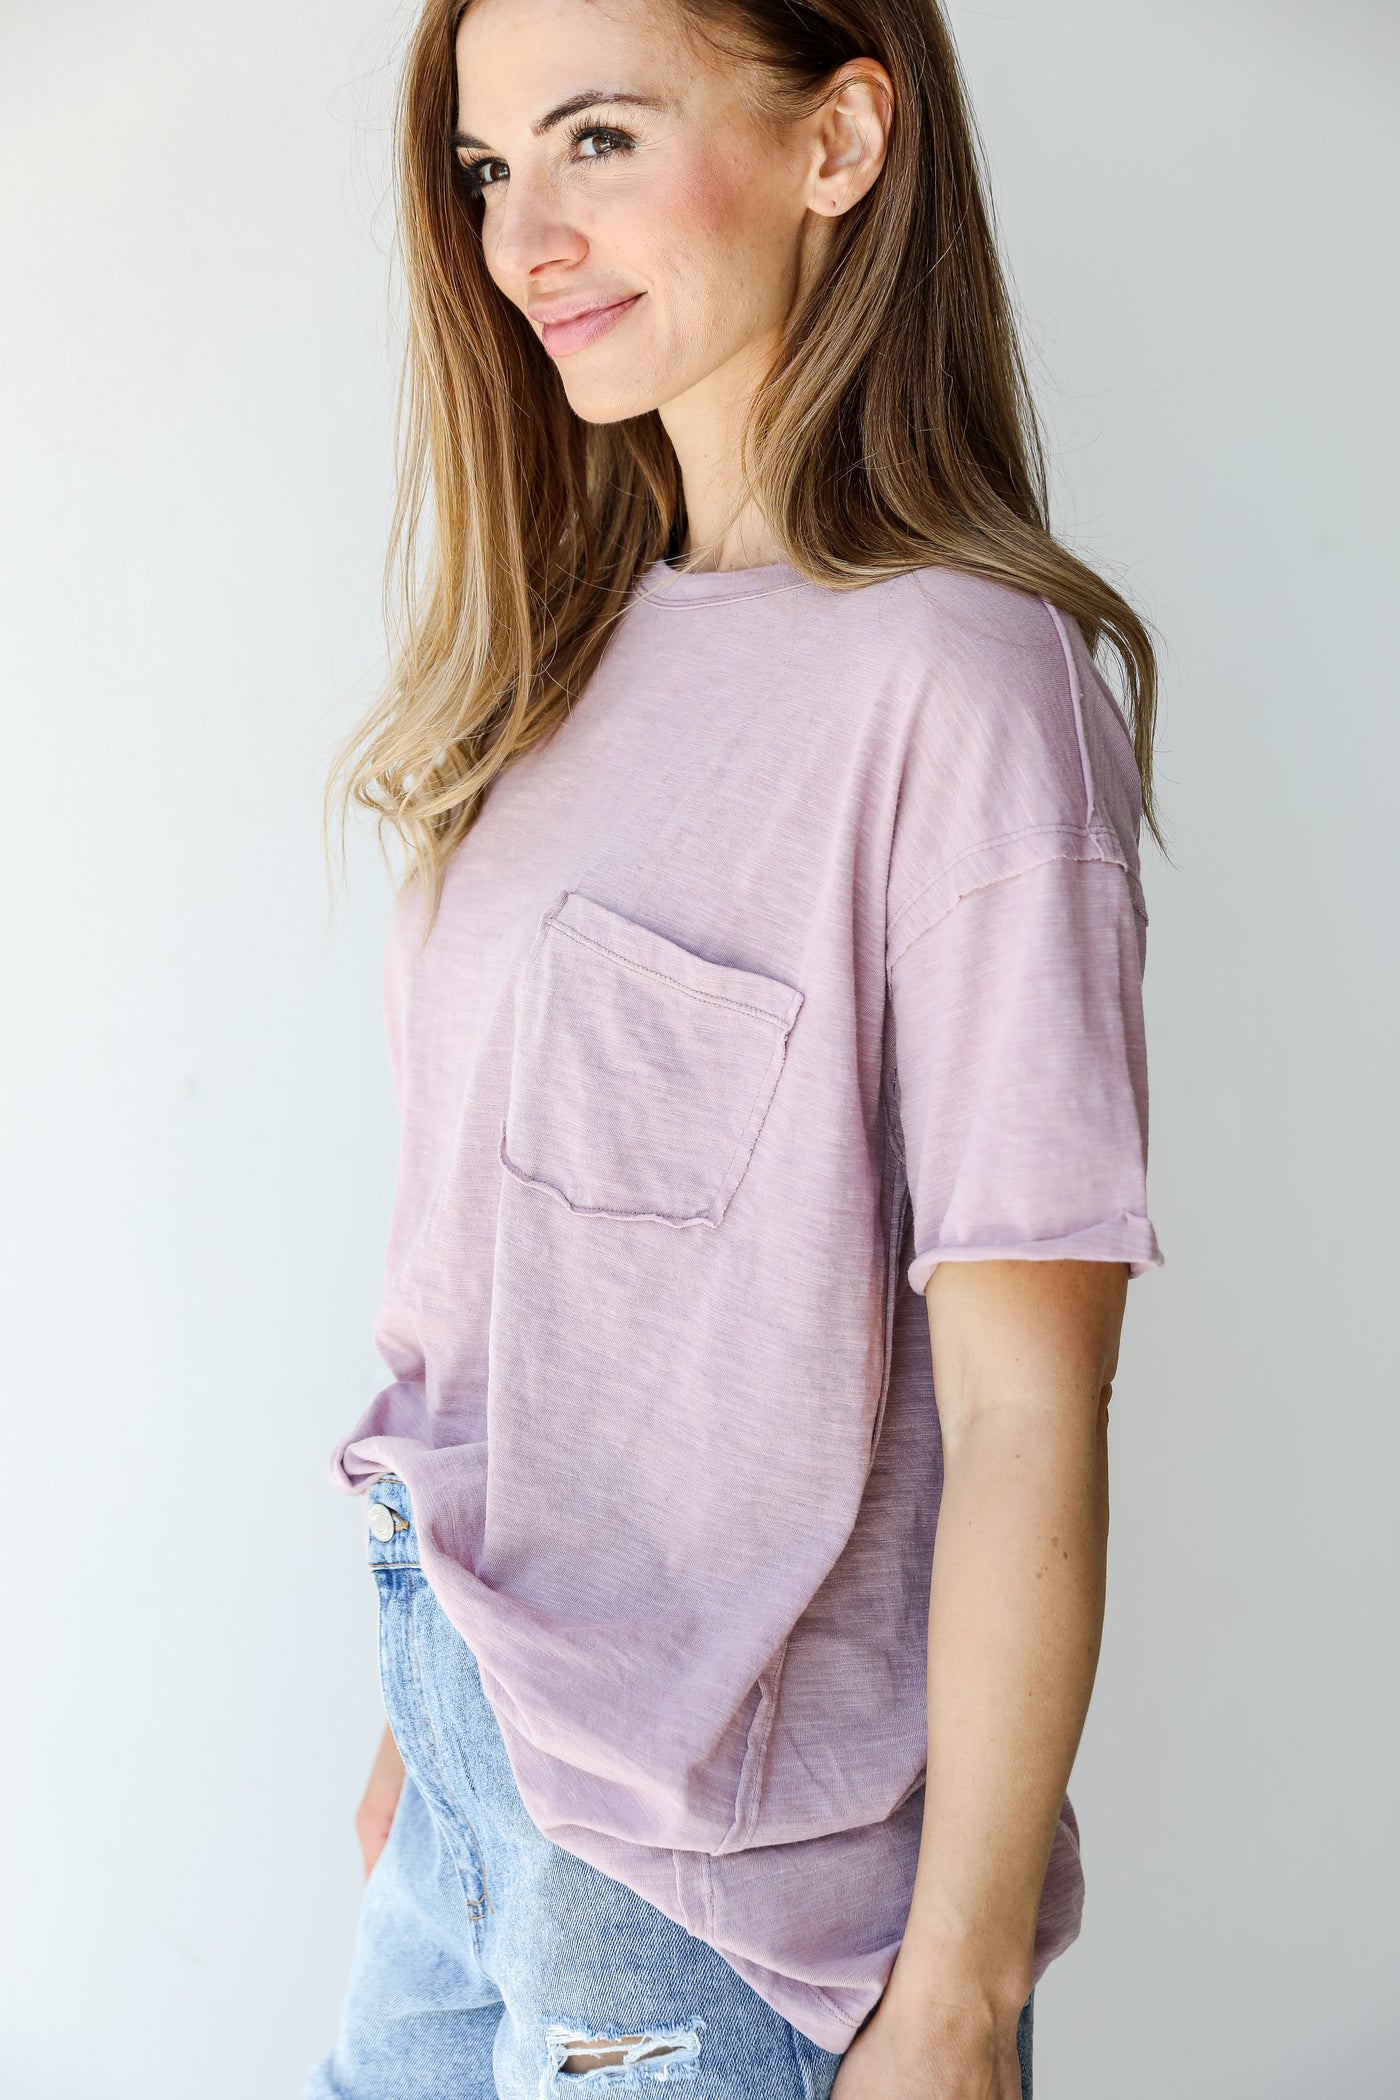 Tee in mauve side view